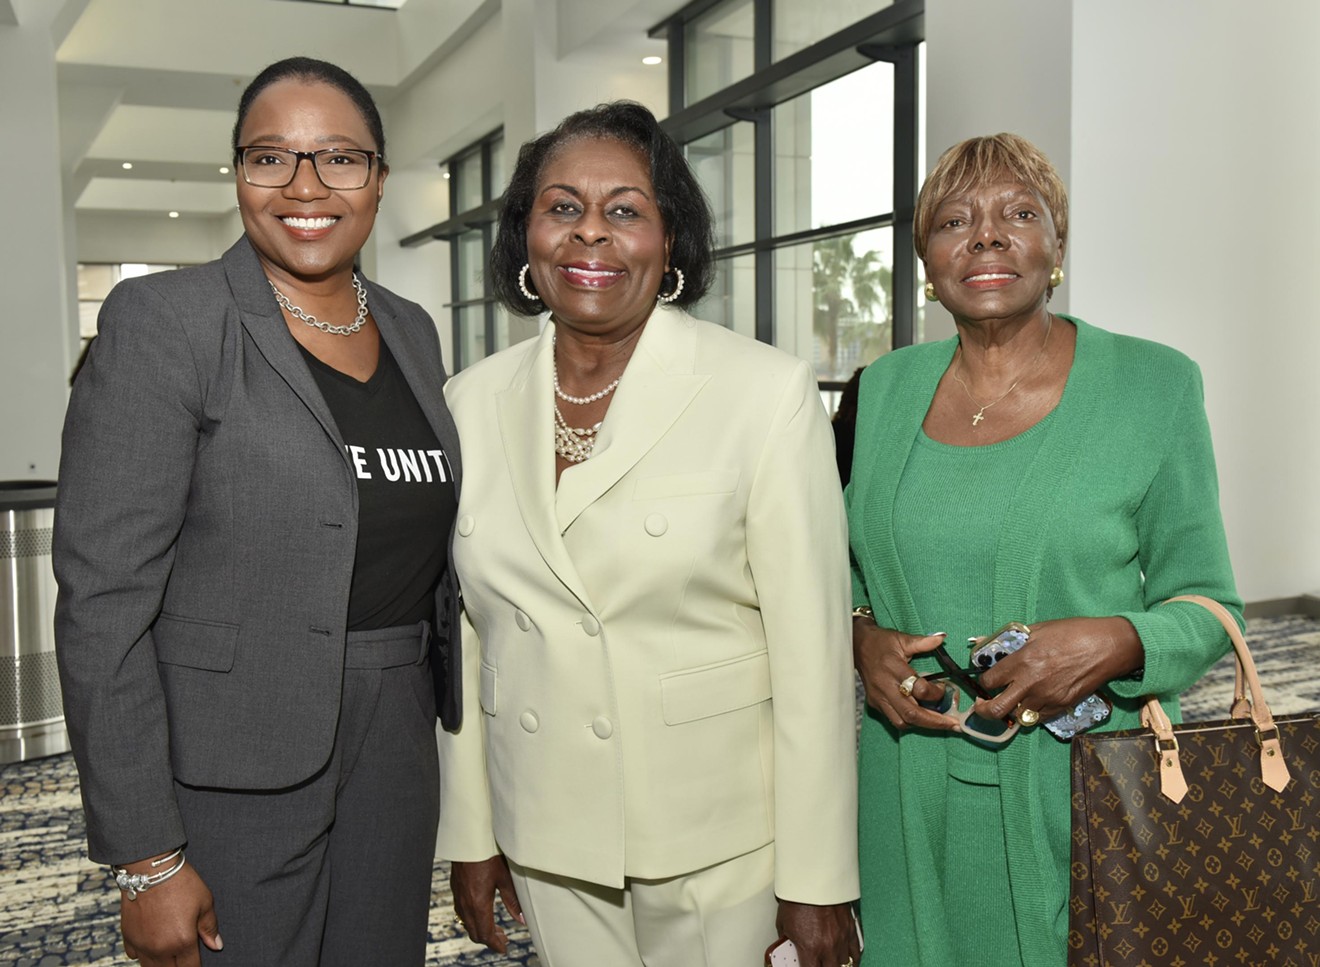 United Way of the Coastal Empire’s Women Who Rule